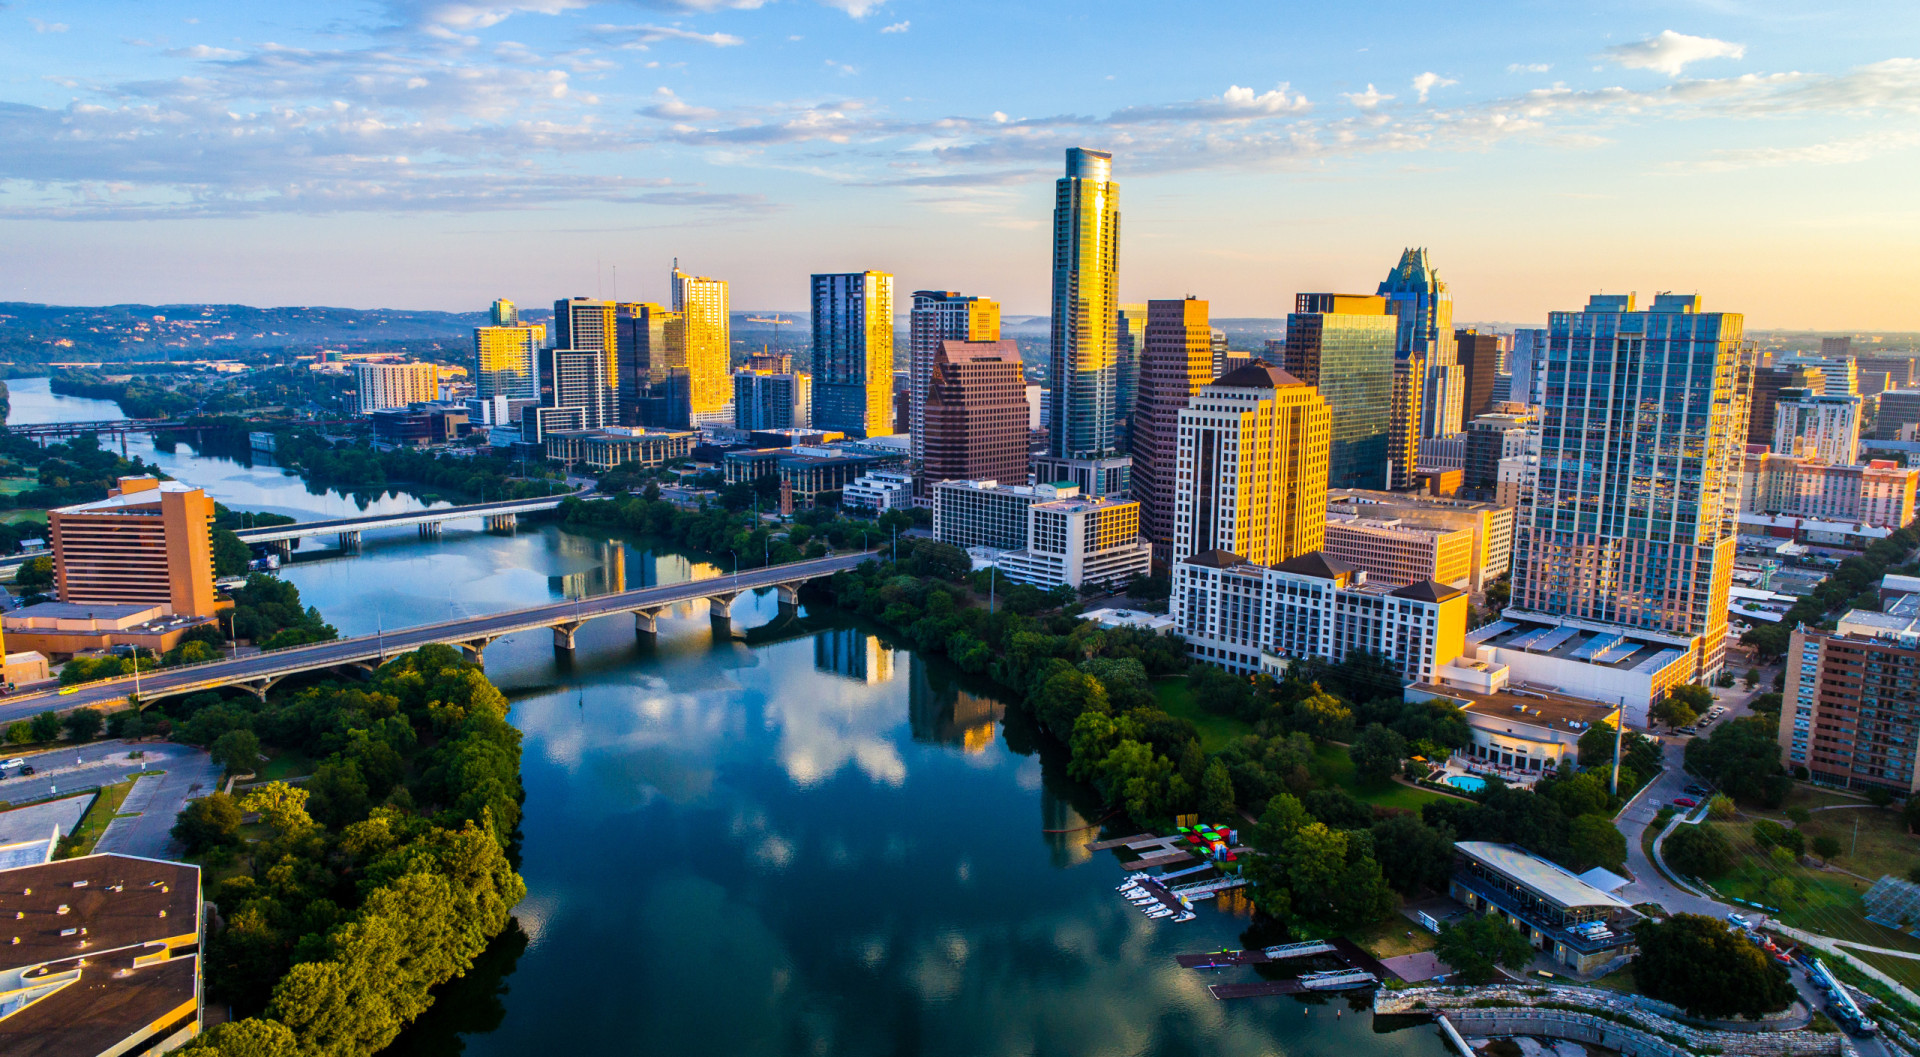 <p>Austin, scoring 65.1 on the rent index, is Texas' vibrant capital. Famous for its music scene and tech industry, it's a city where innovation meets tradition, driving up living costs.</p><p><a href="https://www.msn.com/en-in/community/channel/vid-7xx8mnucu55yw63we9va2gwr7uihbxwc68fxqp25x6tg4ftibpra?cvid=94631541bc0f4f89bfd59158d696ad7e">Follow us and access great exclusive content every day</a></p>